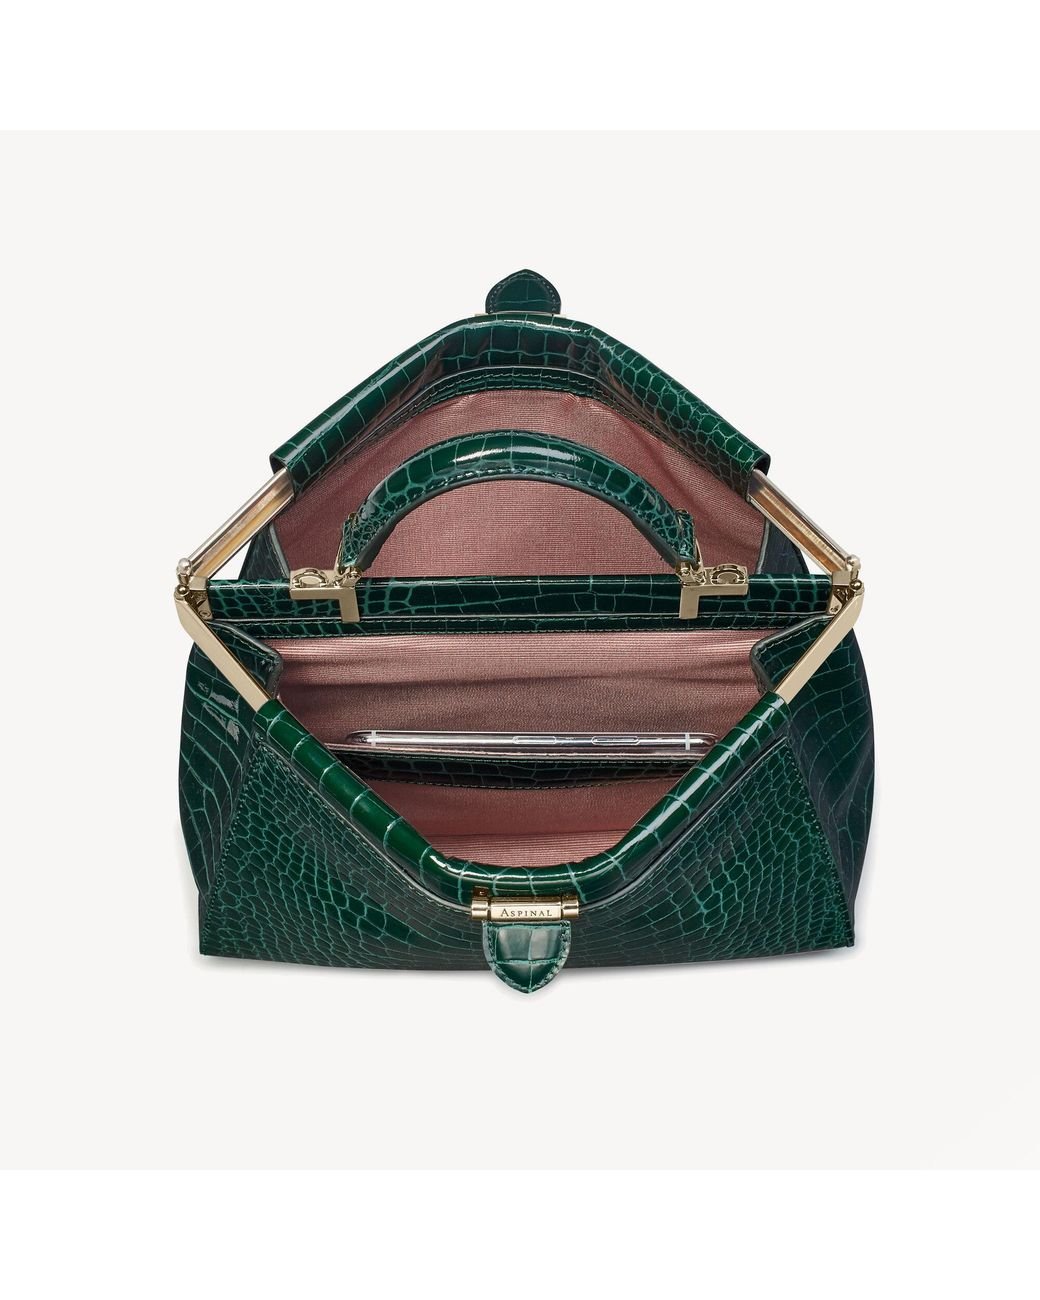 Aspinal of London Leather Small Florence Frame Bag in Green - Lyst